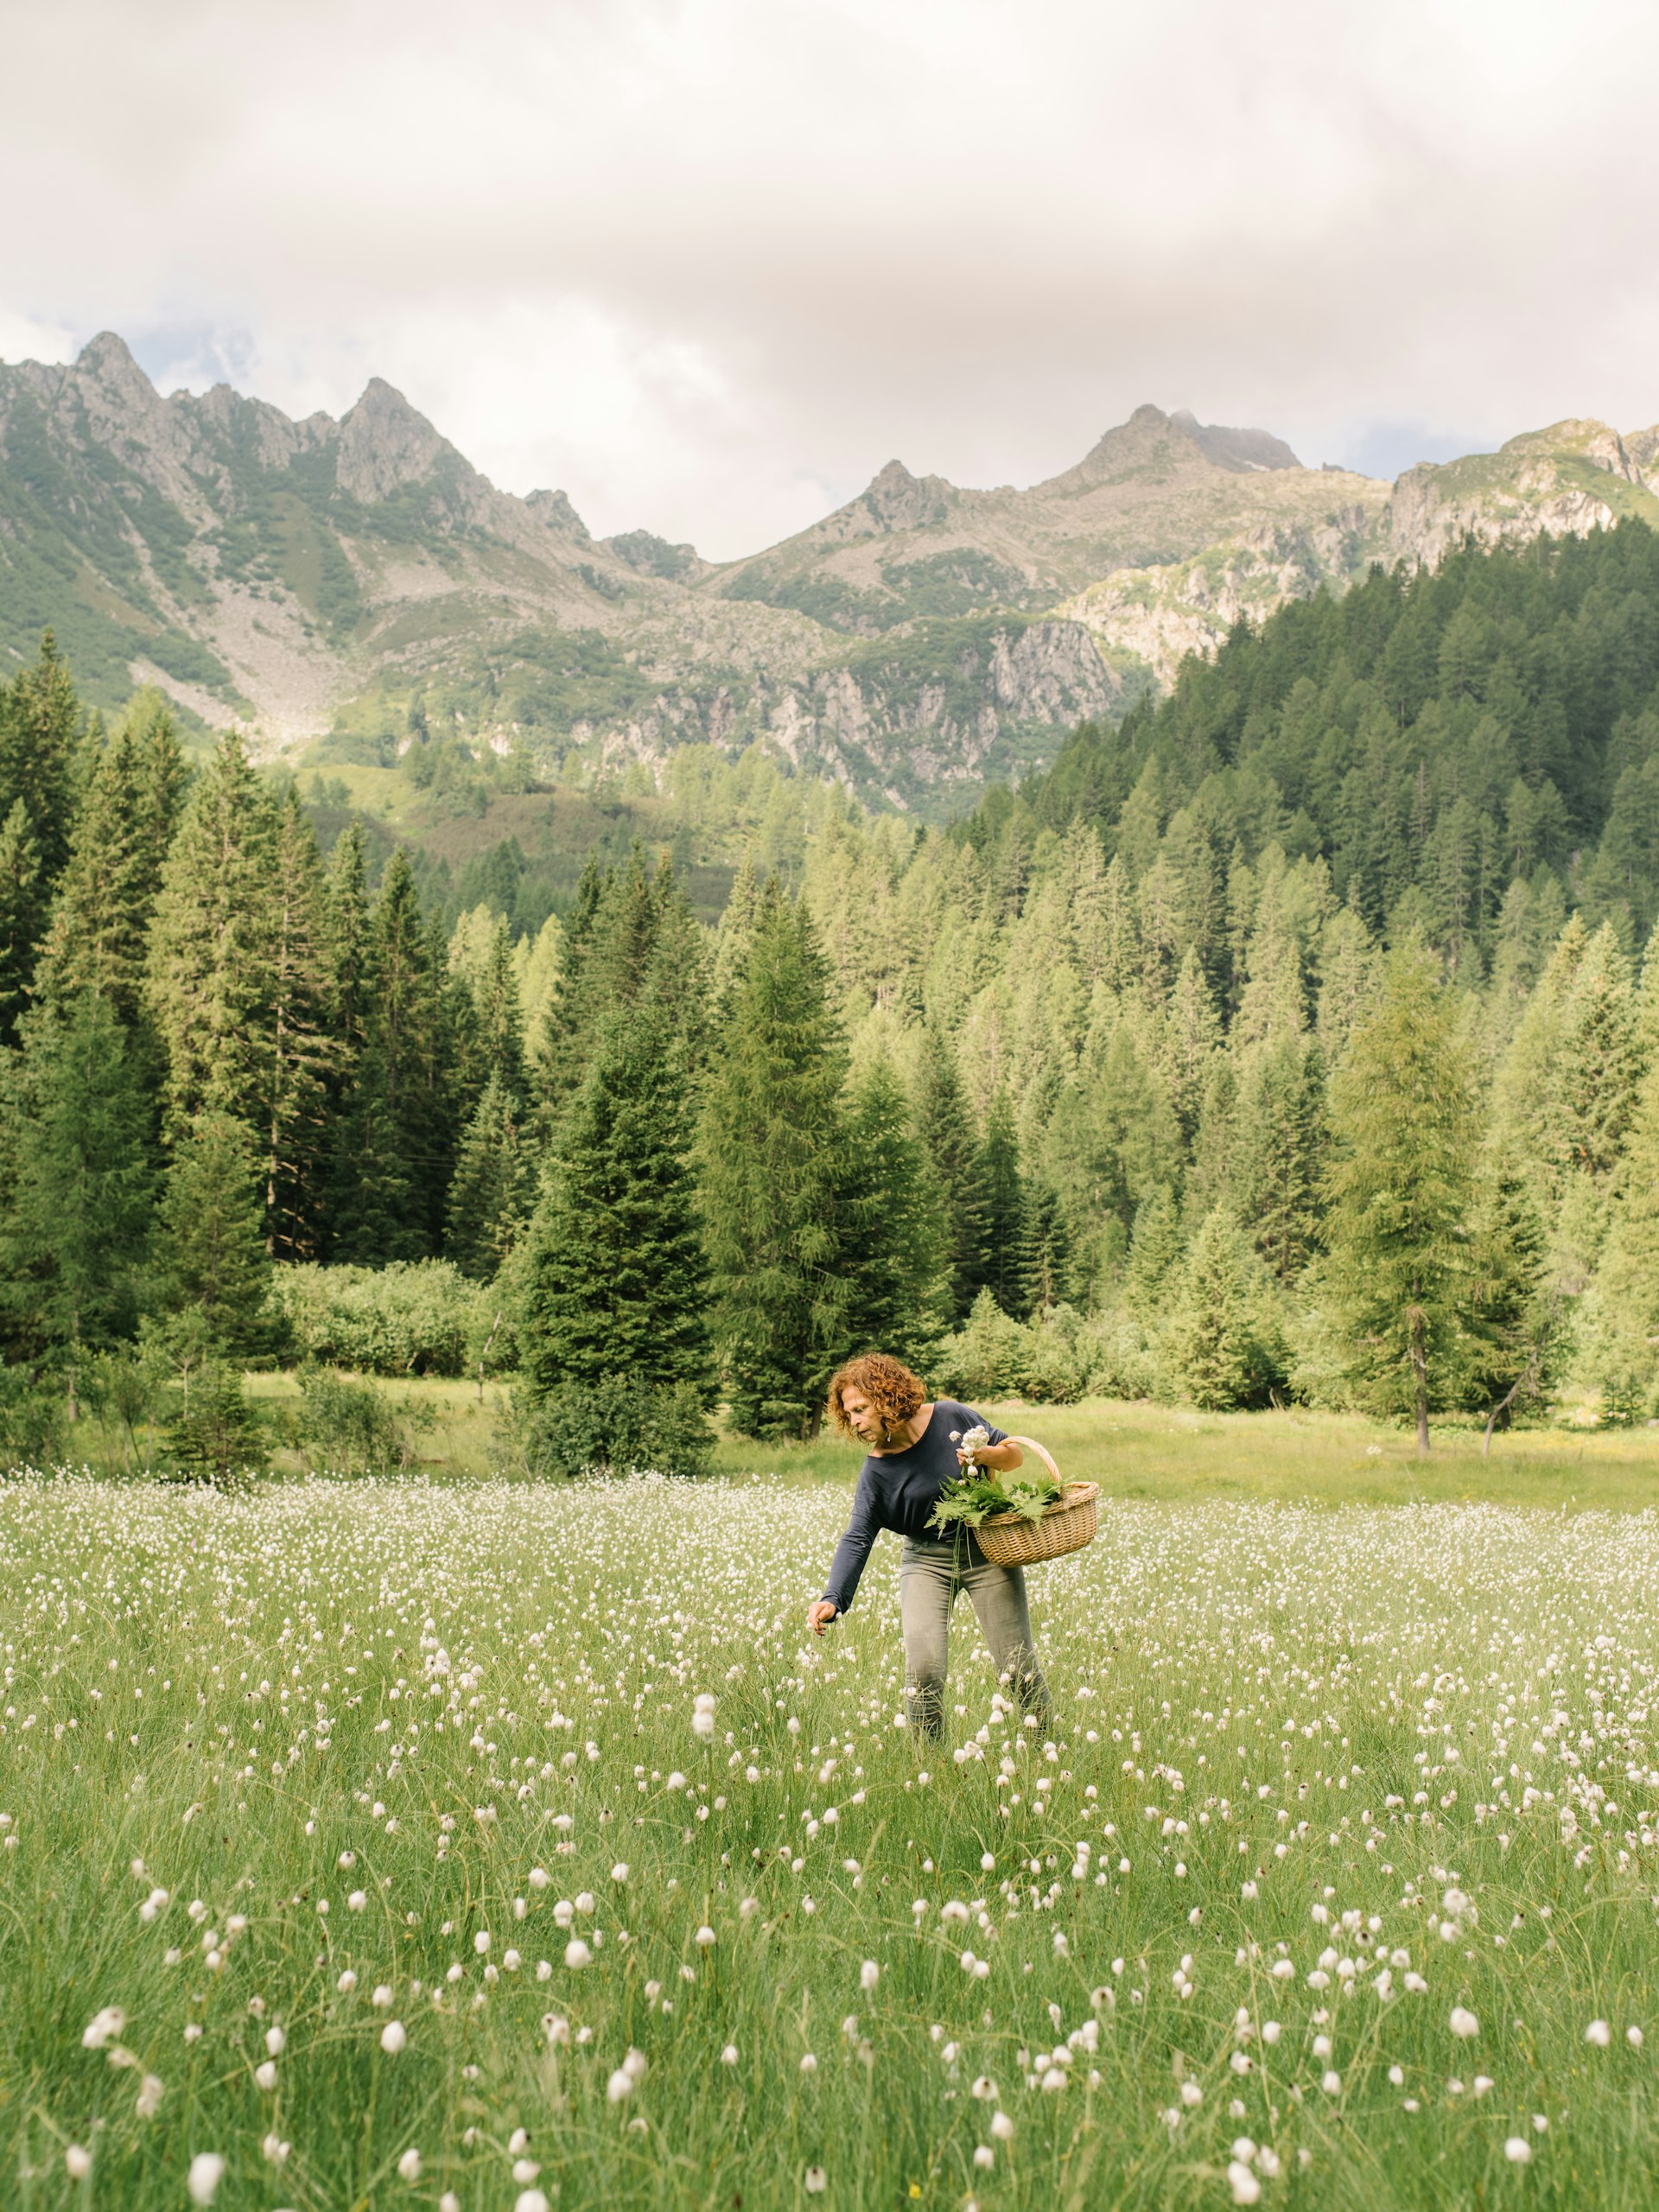 A woman forages for herbs in a mountain meadow